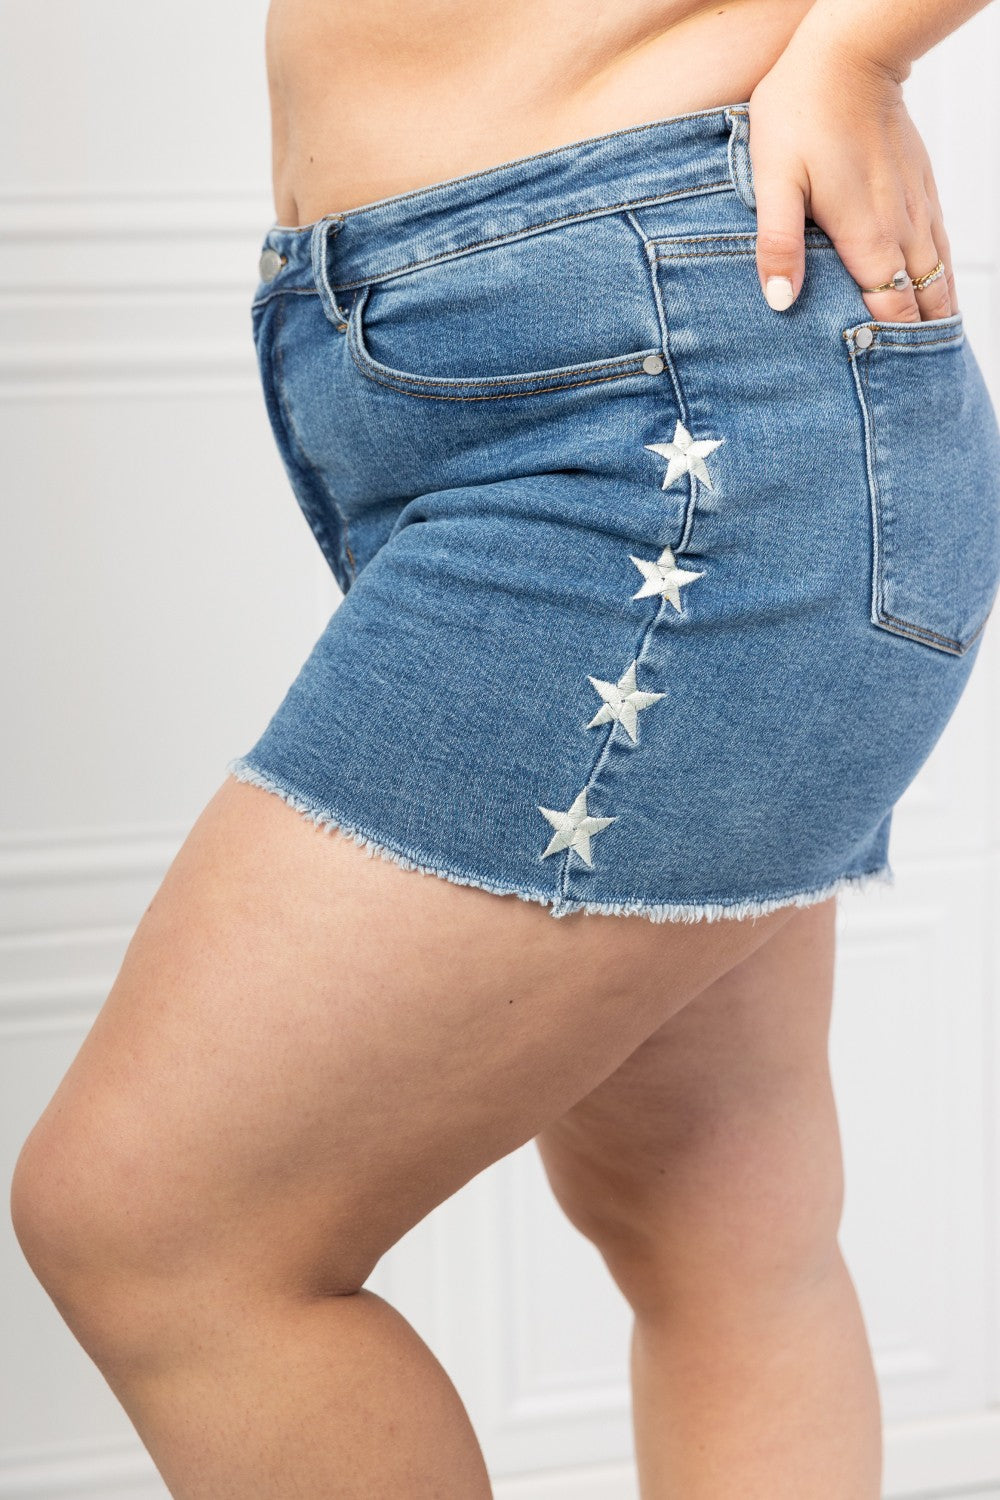 Side VIew, Plus Size, Judy Blue High Waist Embroidered Star Cut Off Jean Shorts 150069